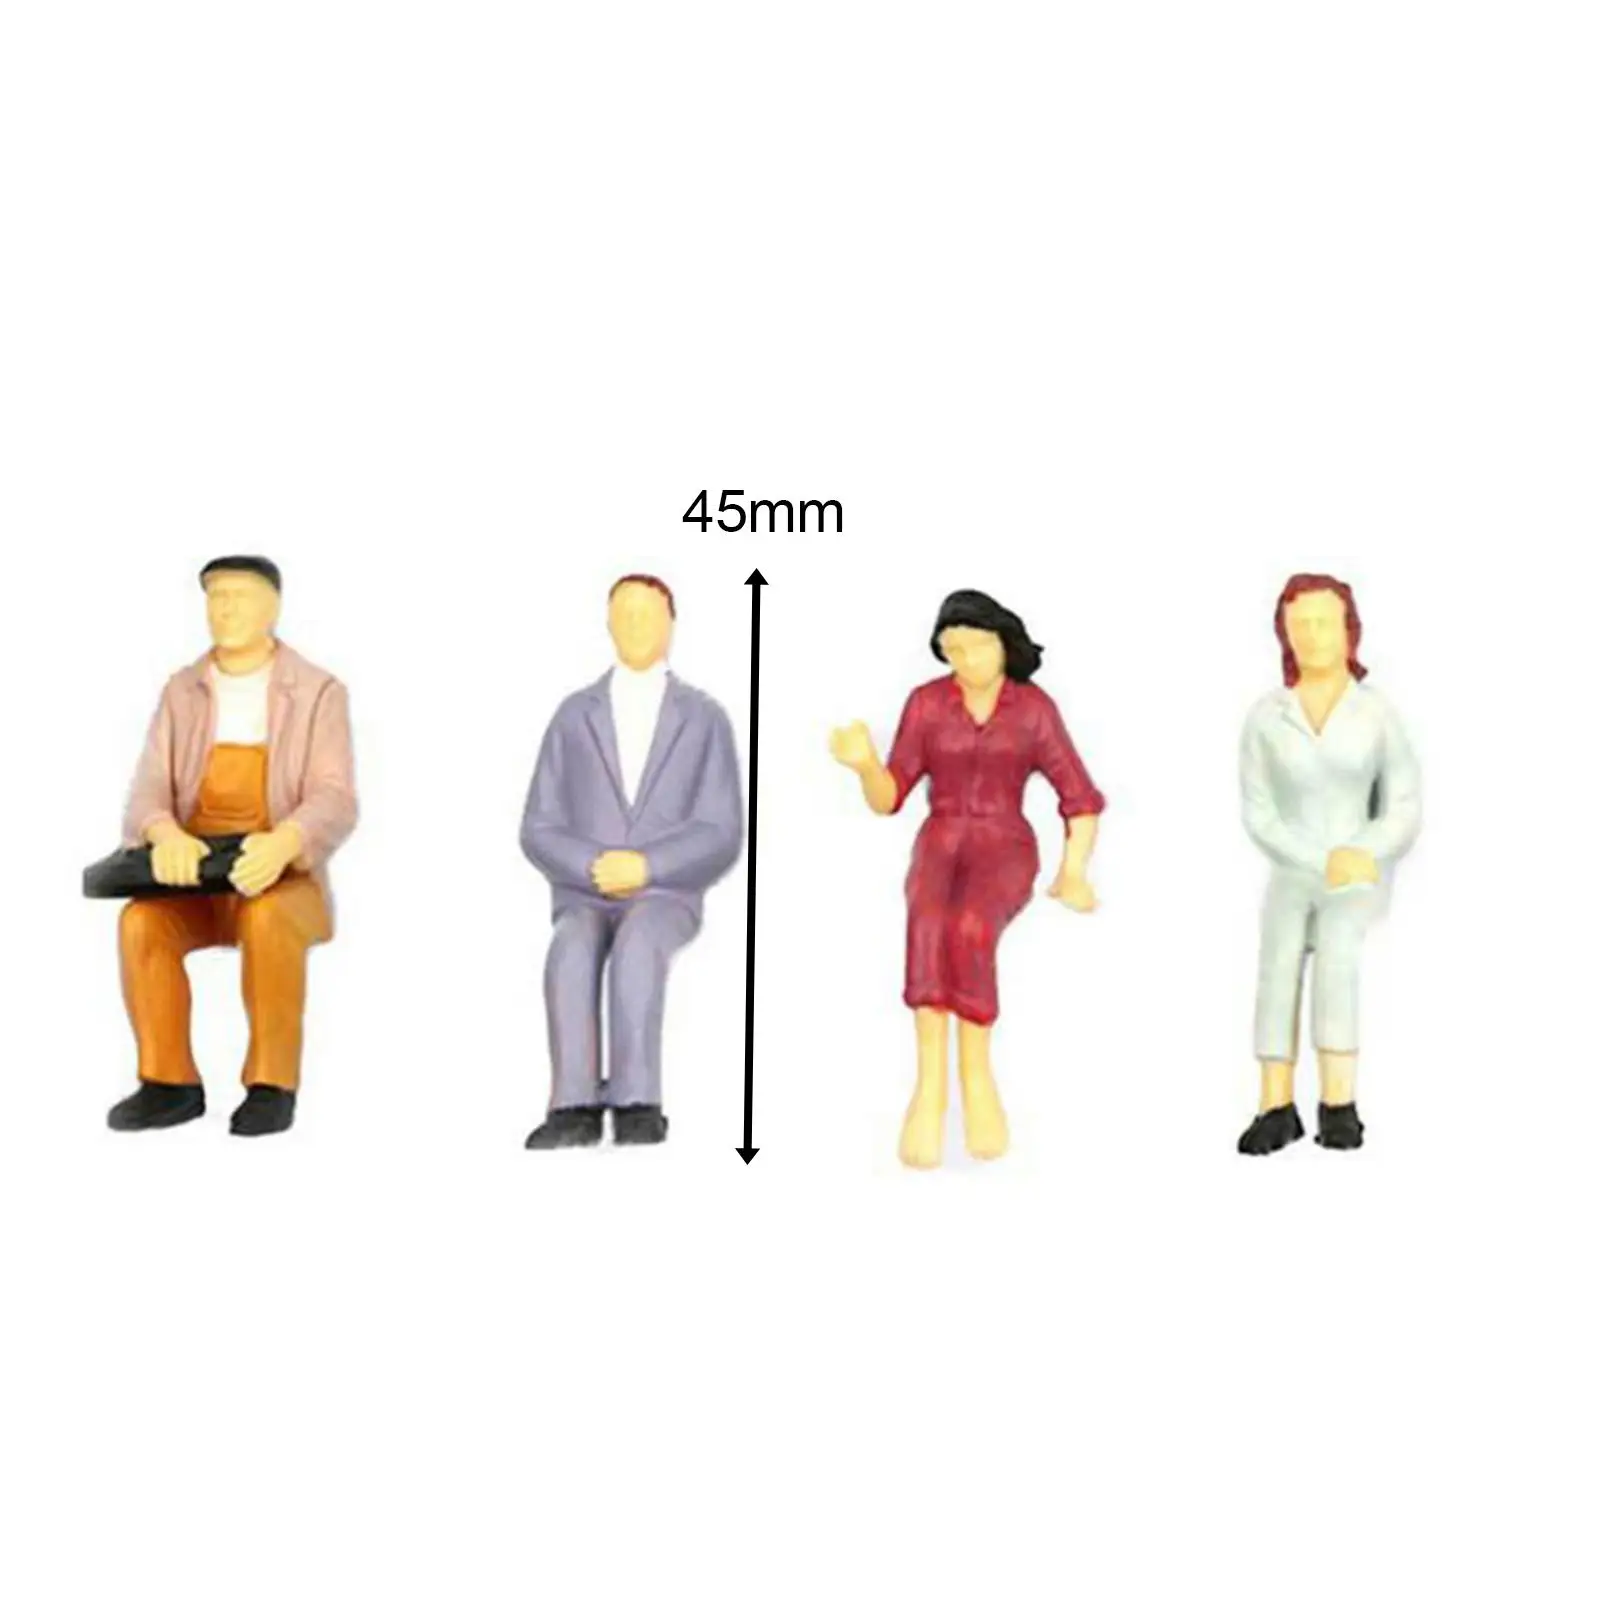 100Pcs 1:30 Figures Handpainted Model in Sitting Pose Woman and Man for Model Train Building Model Architectural Layout Decor